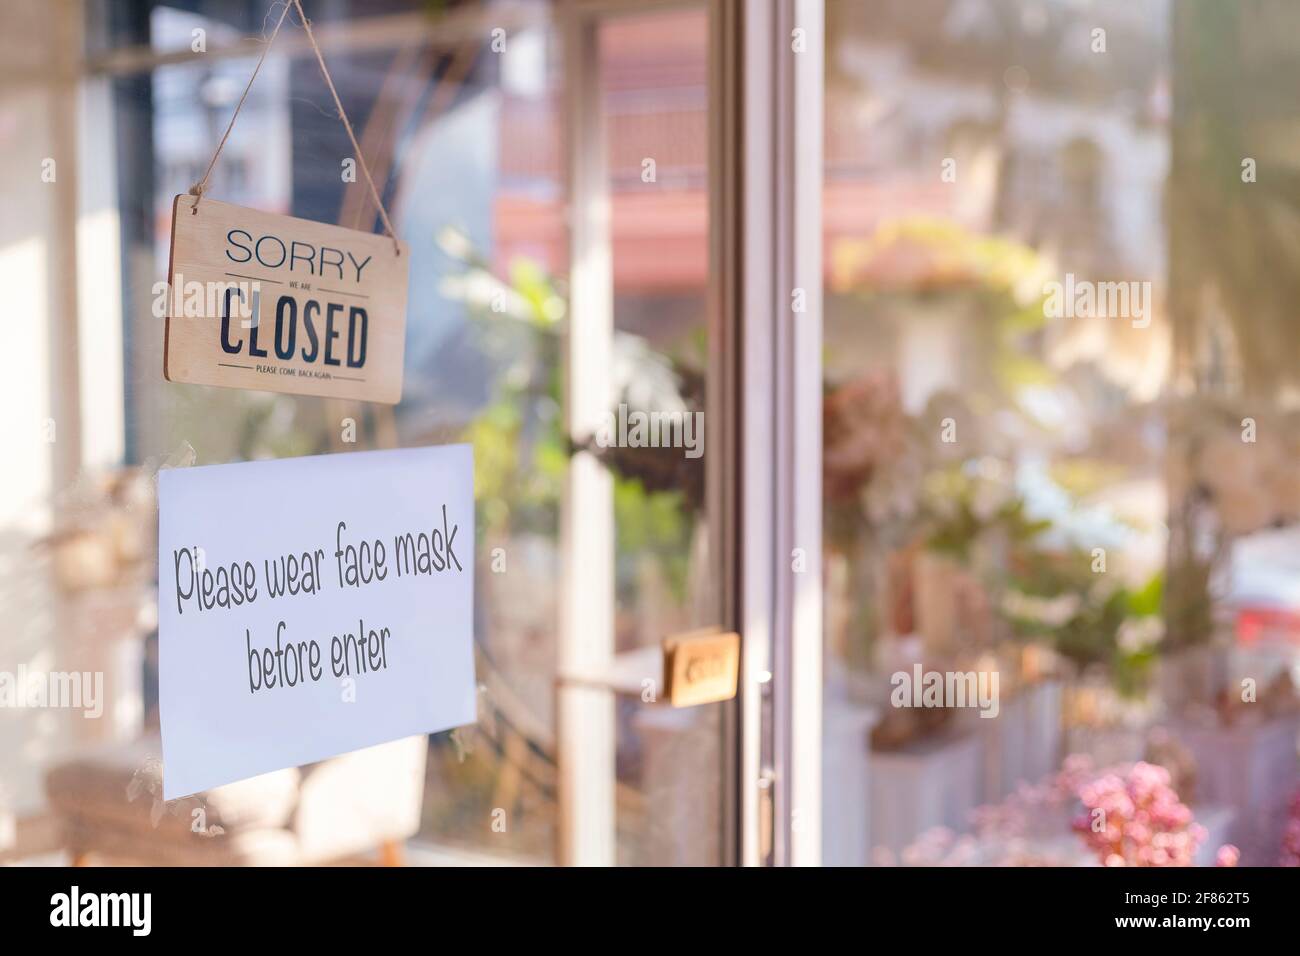 Sorry we are closed wood sign and  Please wear face mask befor enter paper on glass door Protection to pandemic of coronavirus. Close store,restaurant Stock Photo